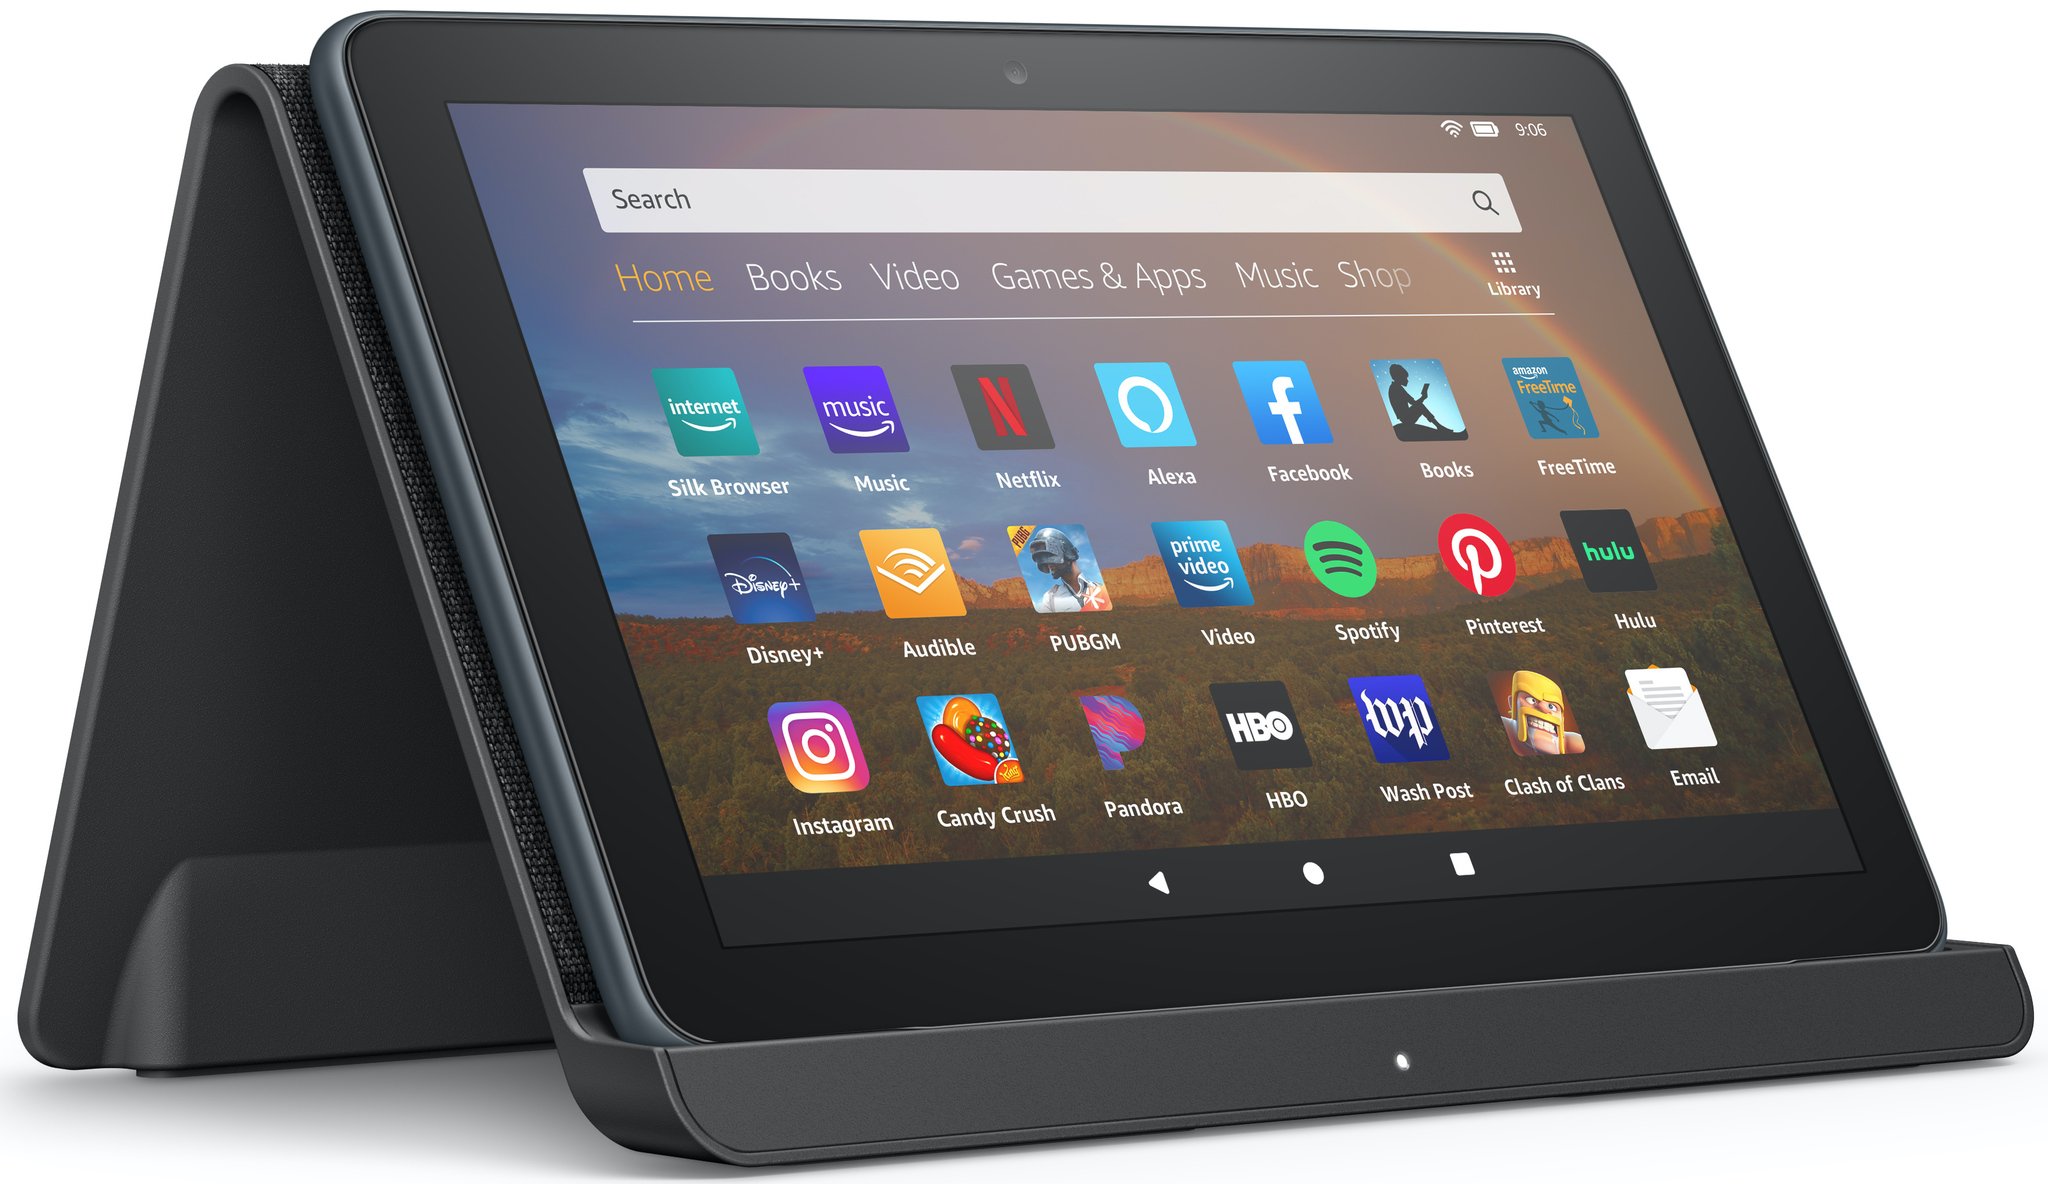 Amazon Fire Hd 8 Plus With Dock